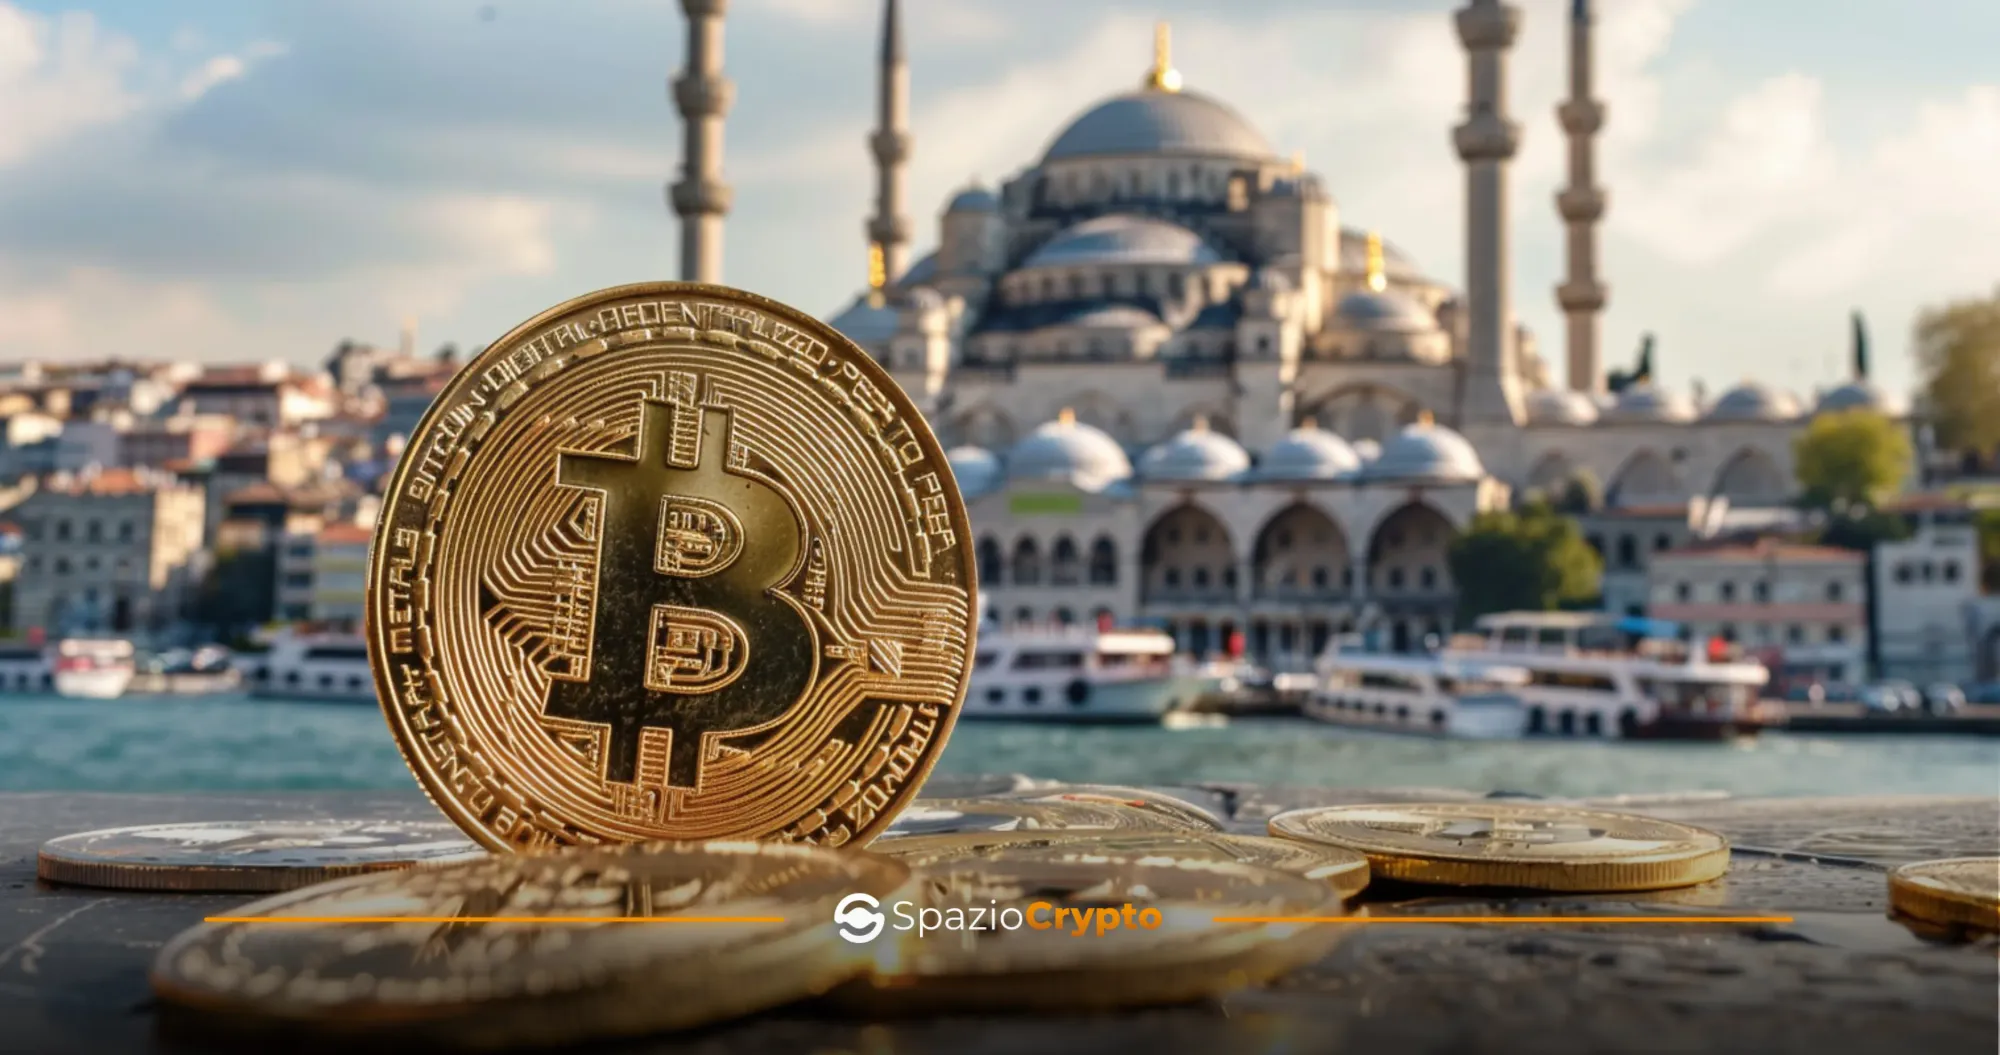 Turkey Strikes Back at Cryptocurrencies: A Transaction Tax is Evaluated - Spaziocrypto